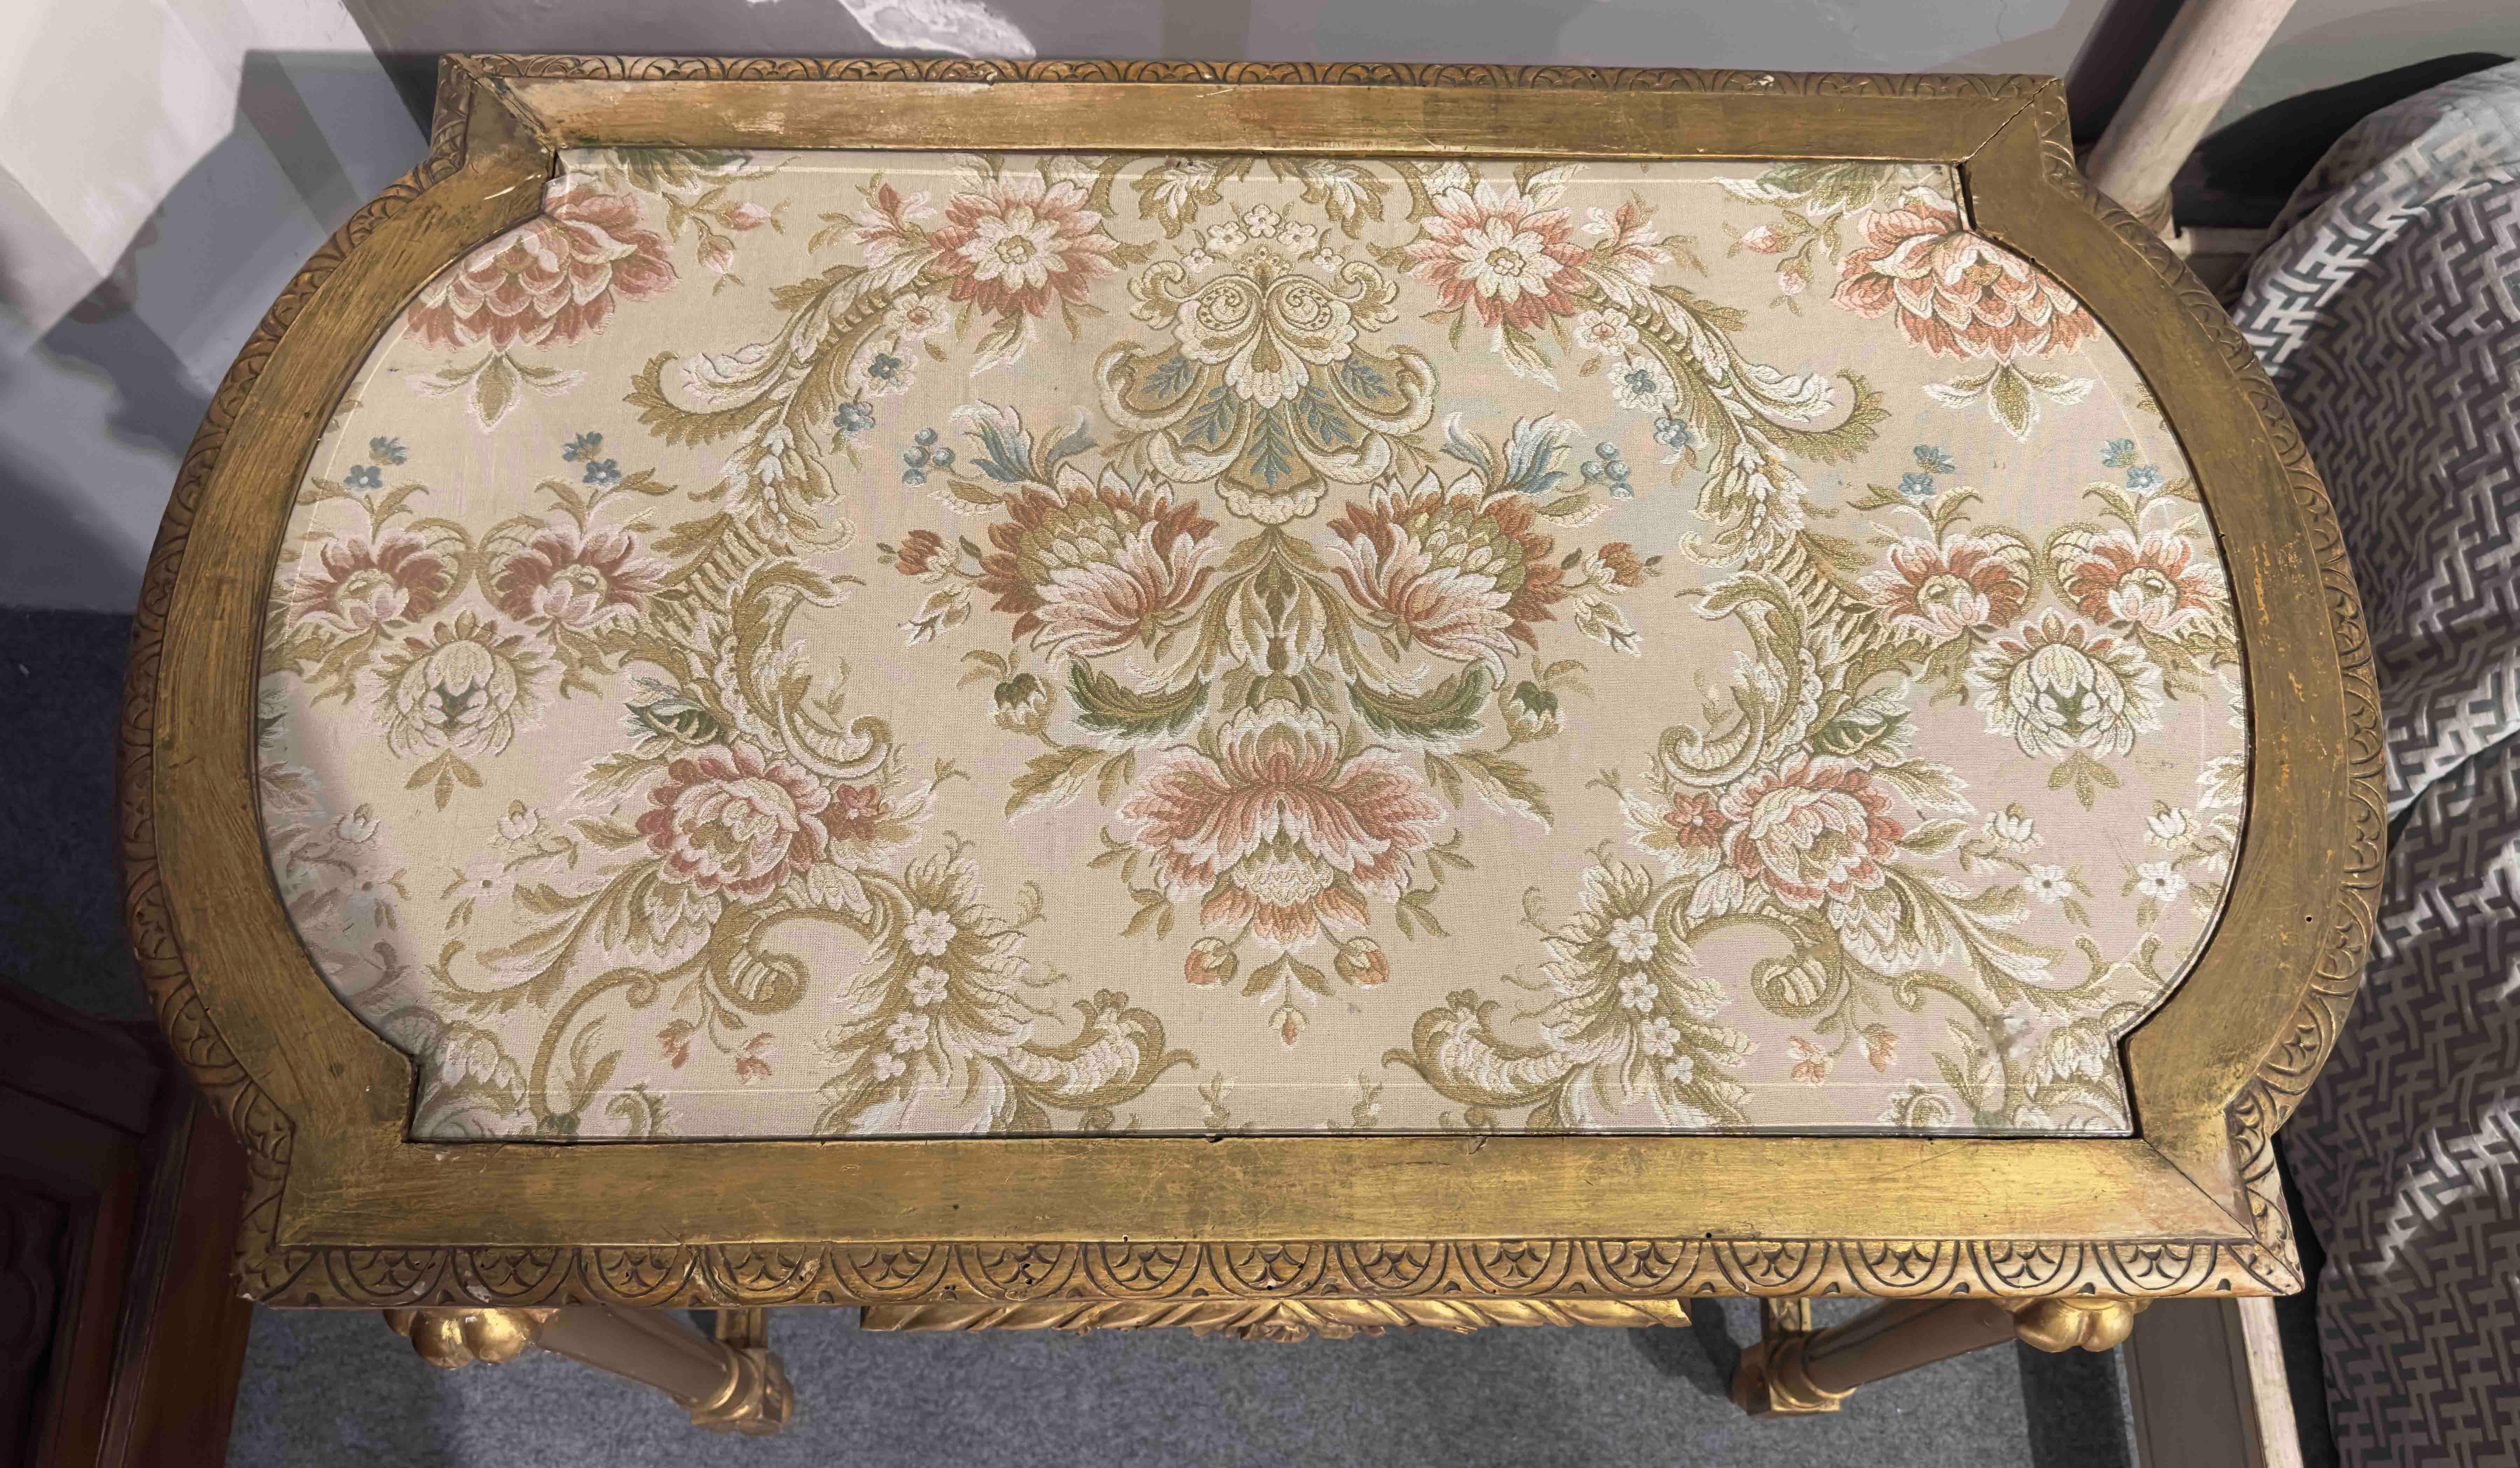 19th Century END OF THE 19th CENTURY GOLDEN TABLE IN NEOCLASSIC STYLE  For Sale